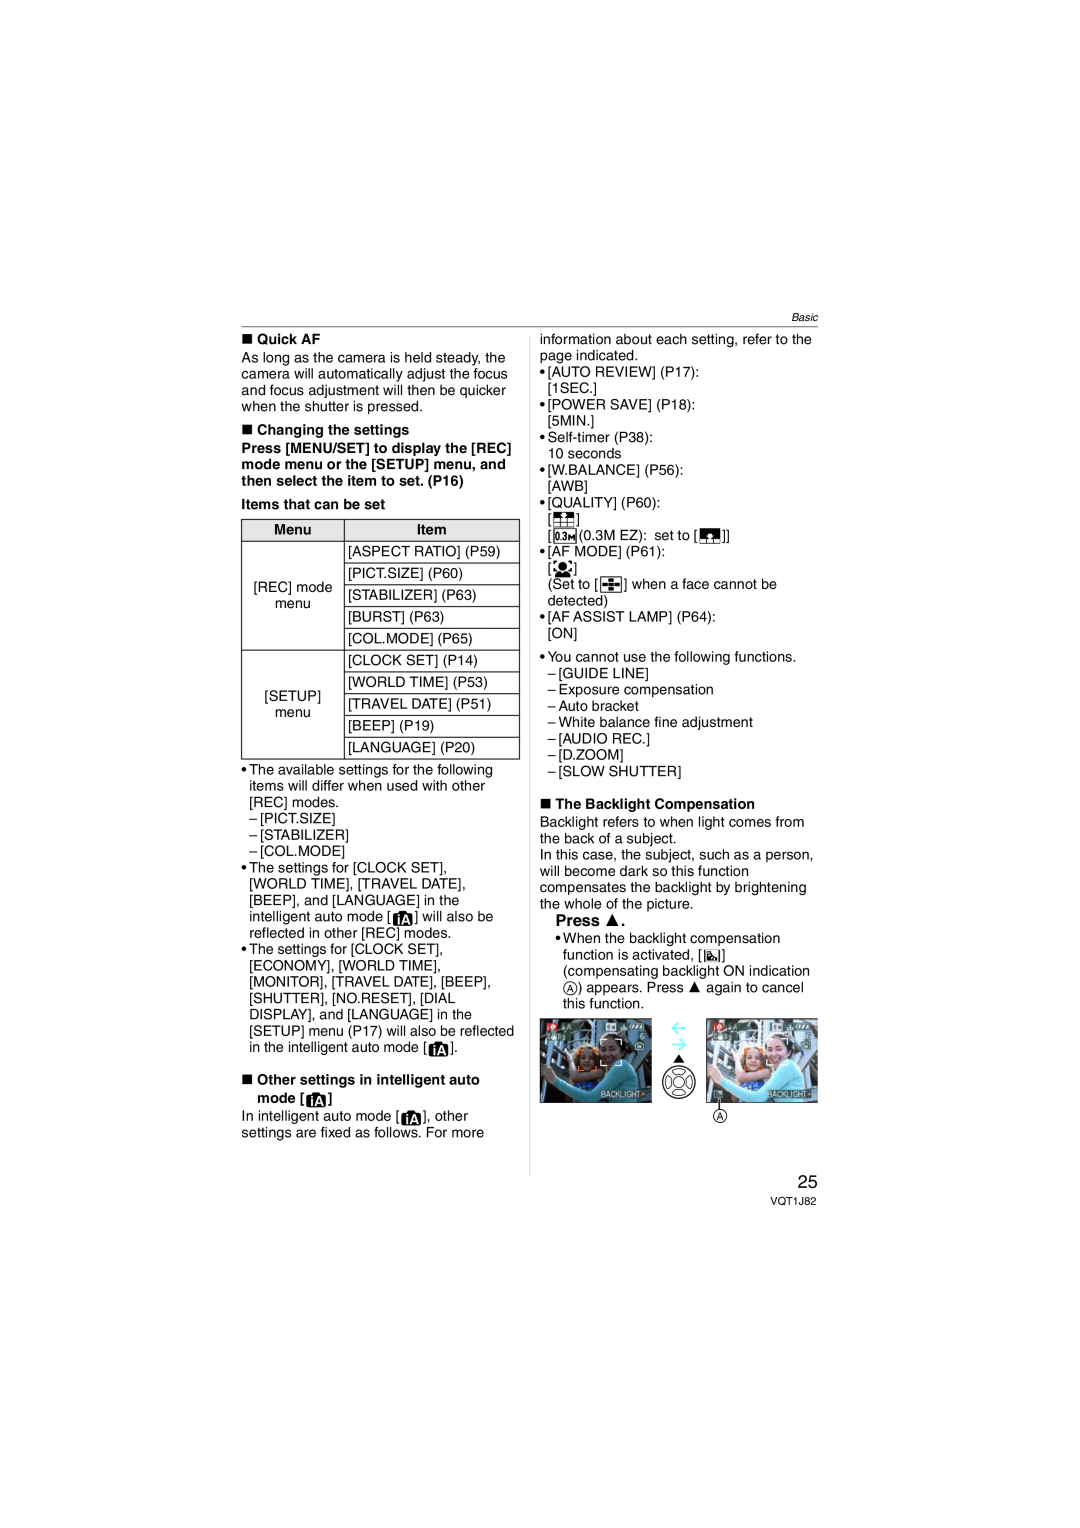 Panasonic DMC-FX33 operating instructions Press, ∫ Quick AF, Changing the settings, Items that can be set, Menu 